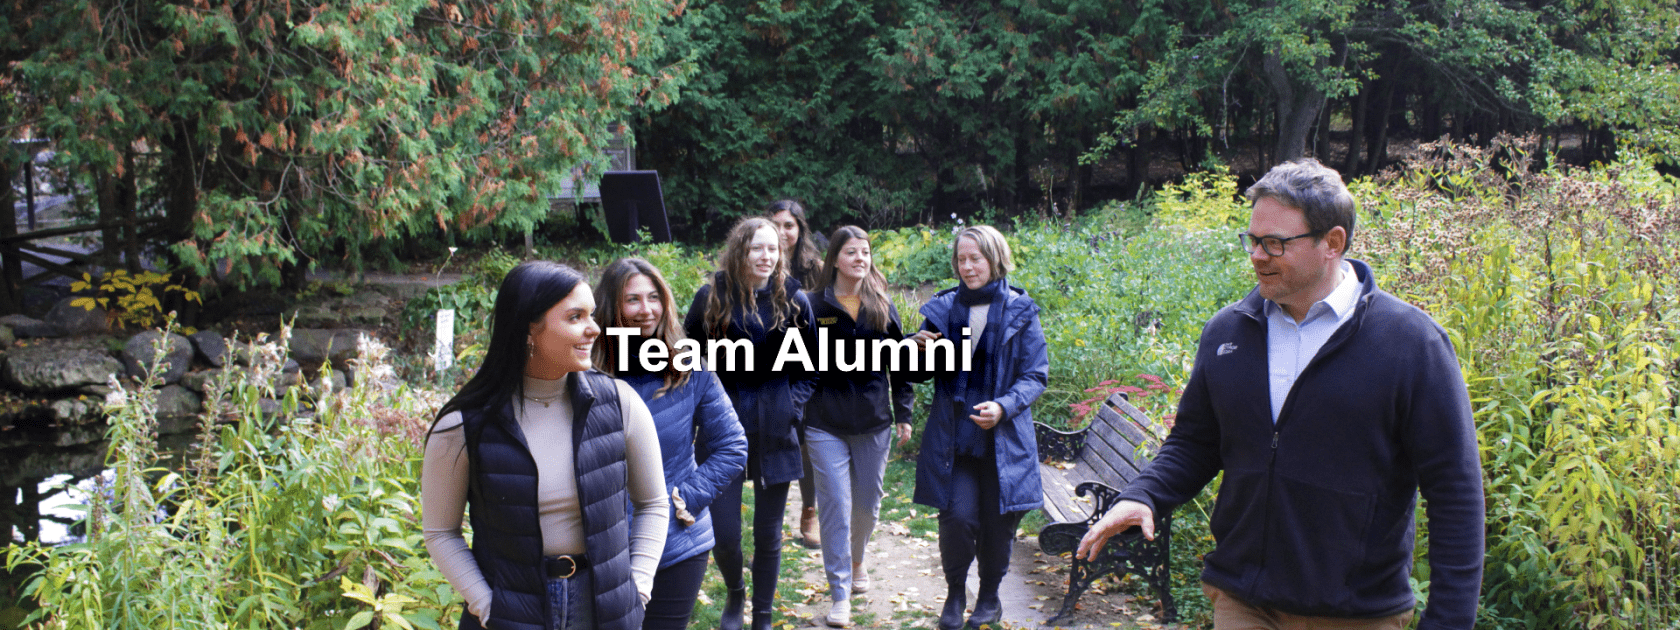 RCVM@OVC alumni and current team members walking through a wooded area in the Arboretum, University of Guelph